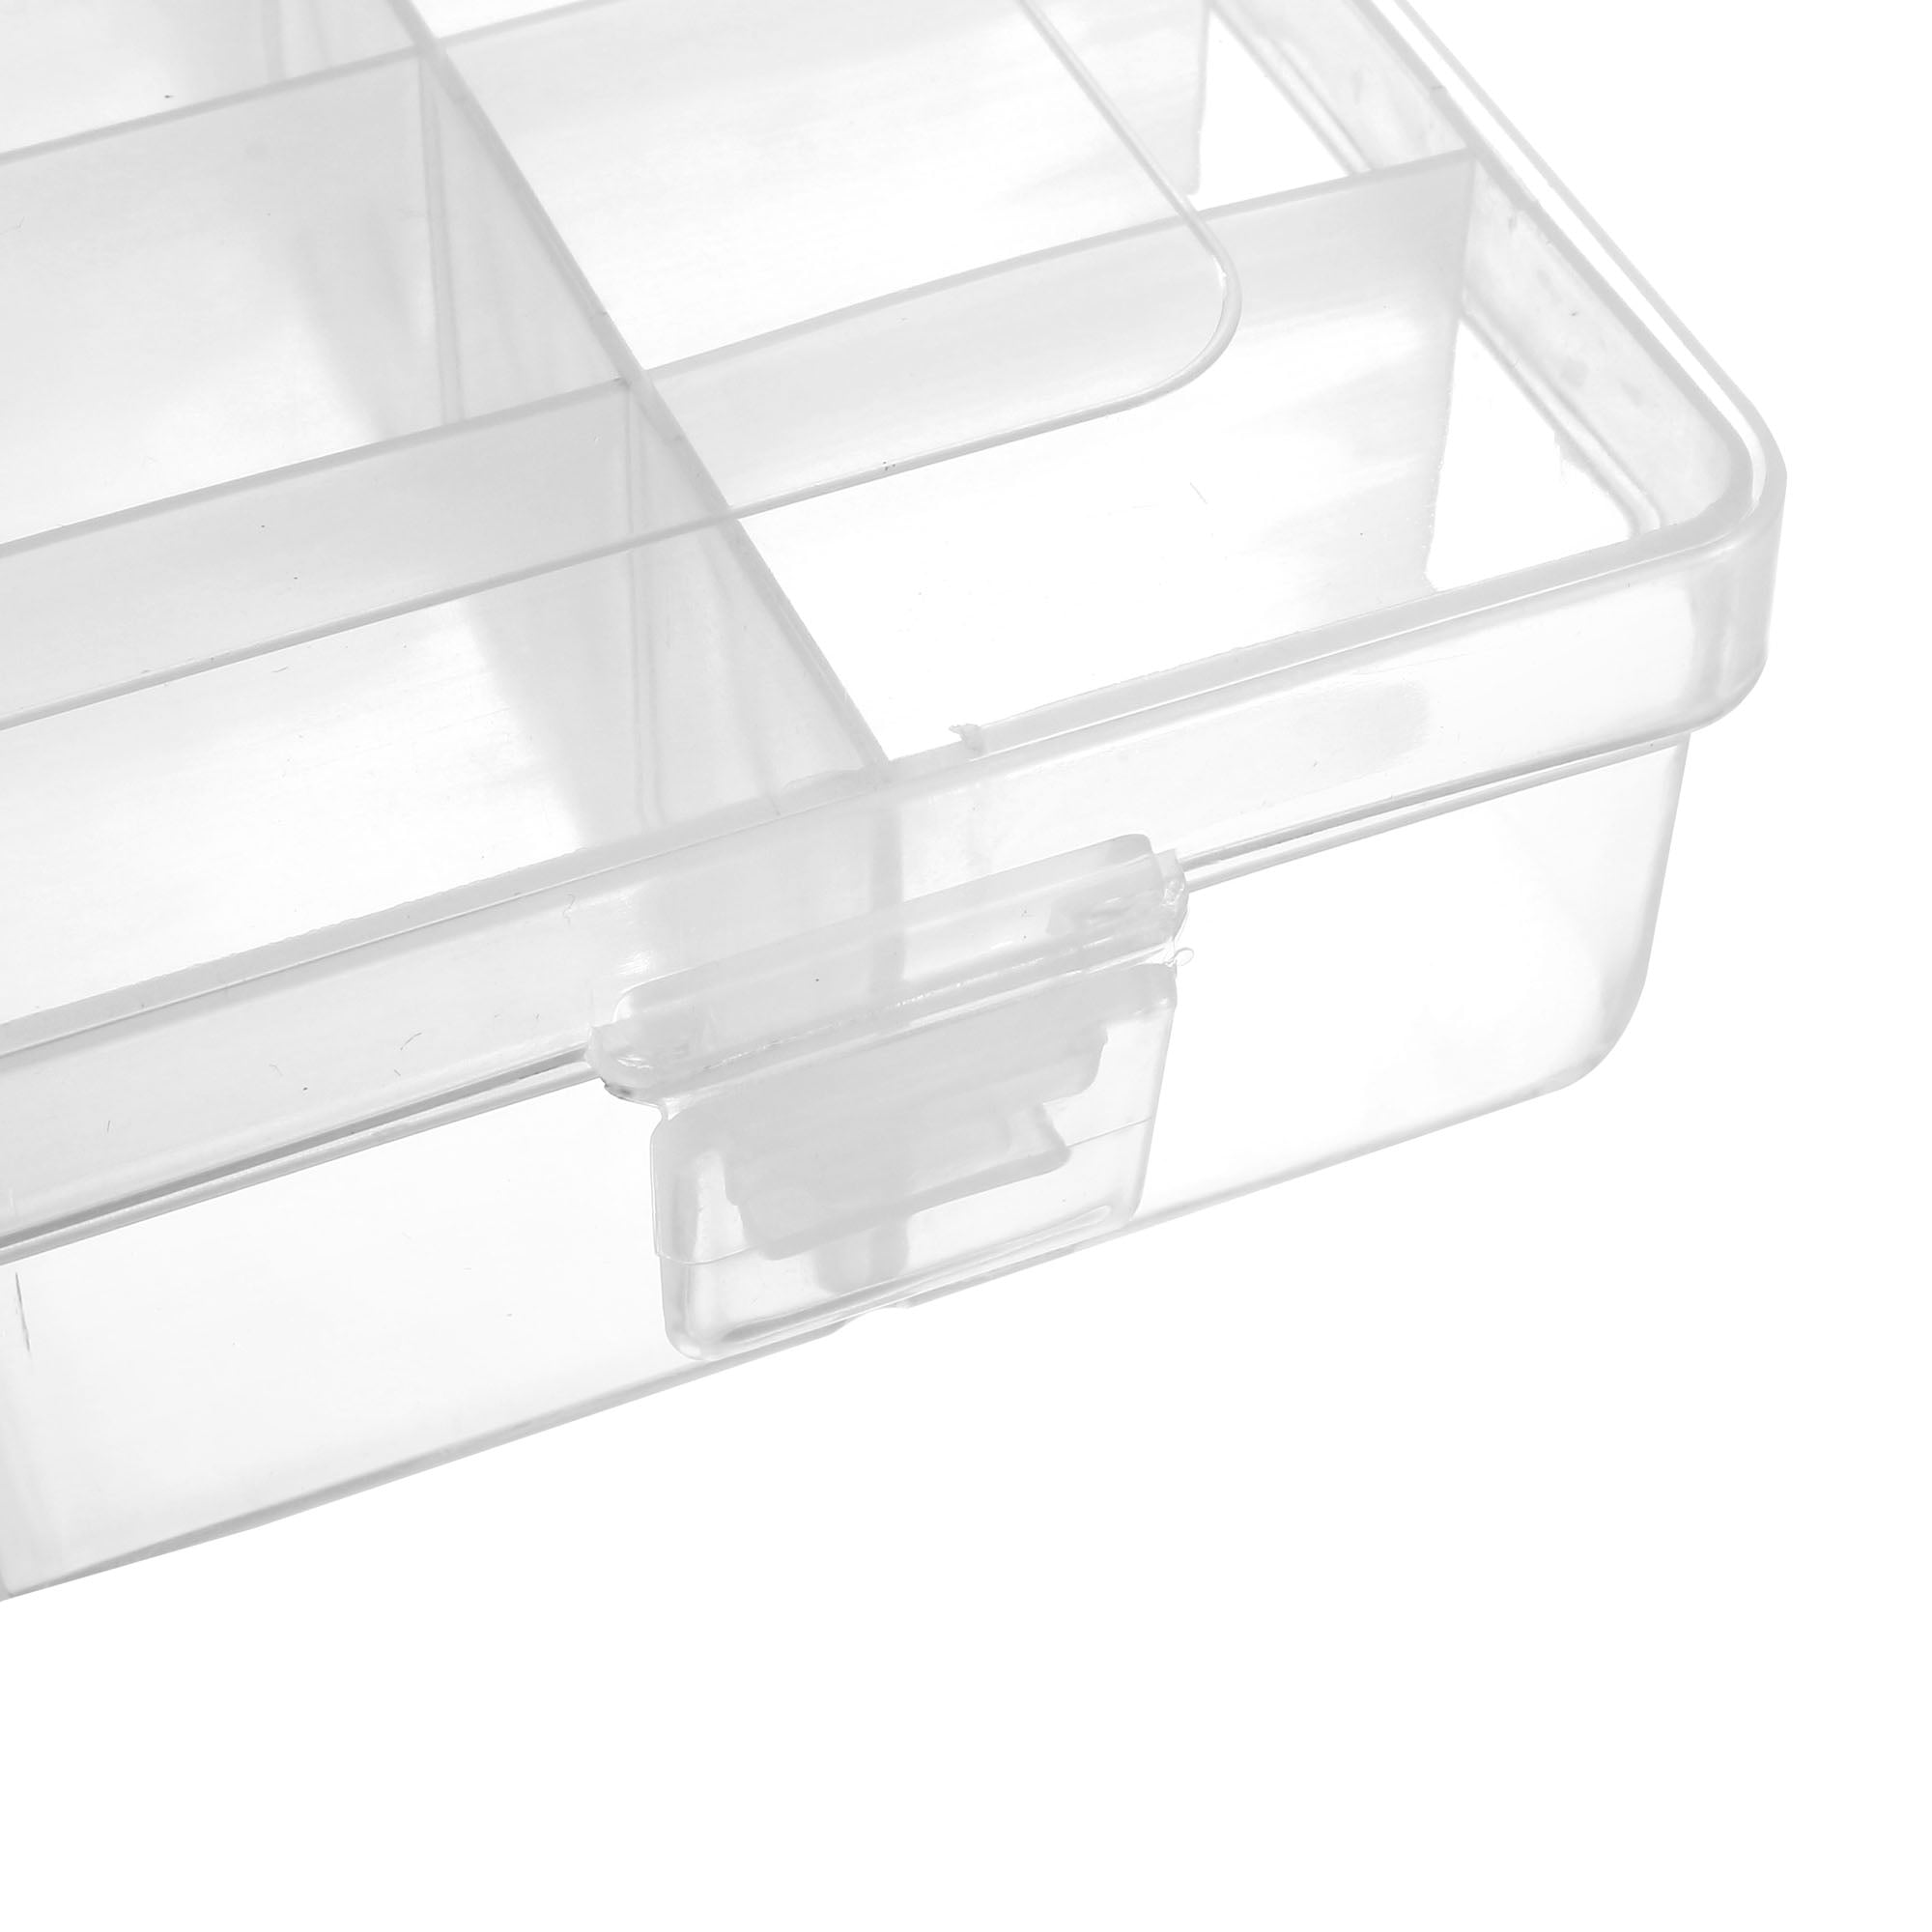 Clear Craft and Photo Storage - 4x6 Case